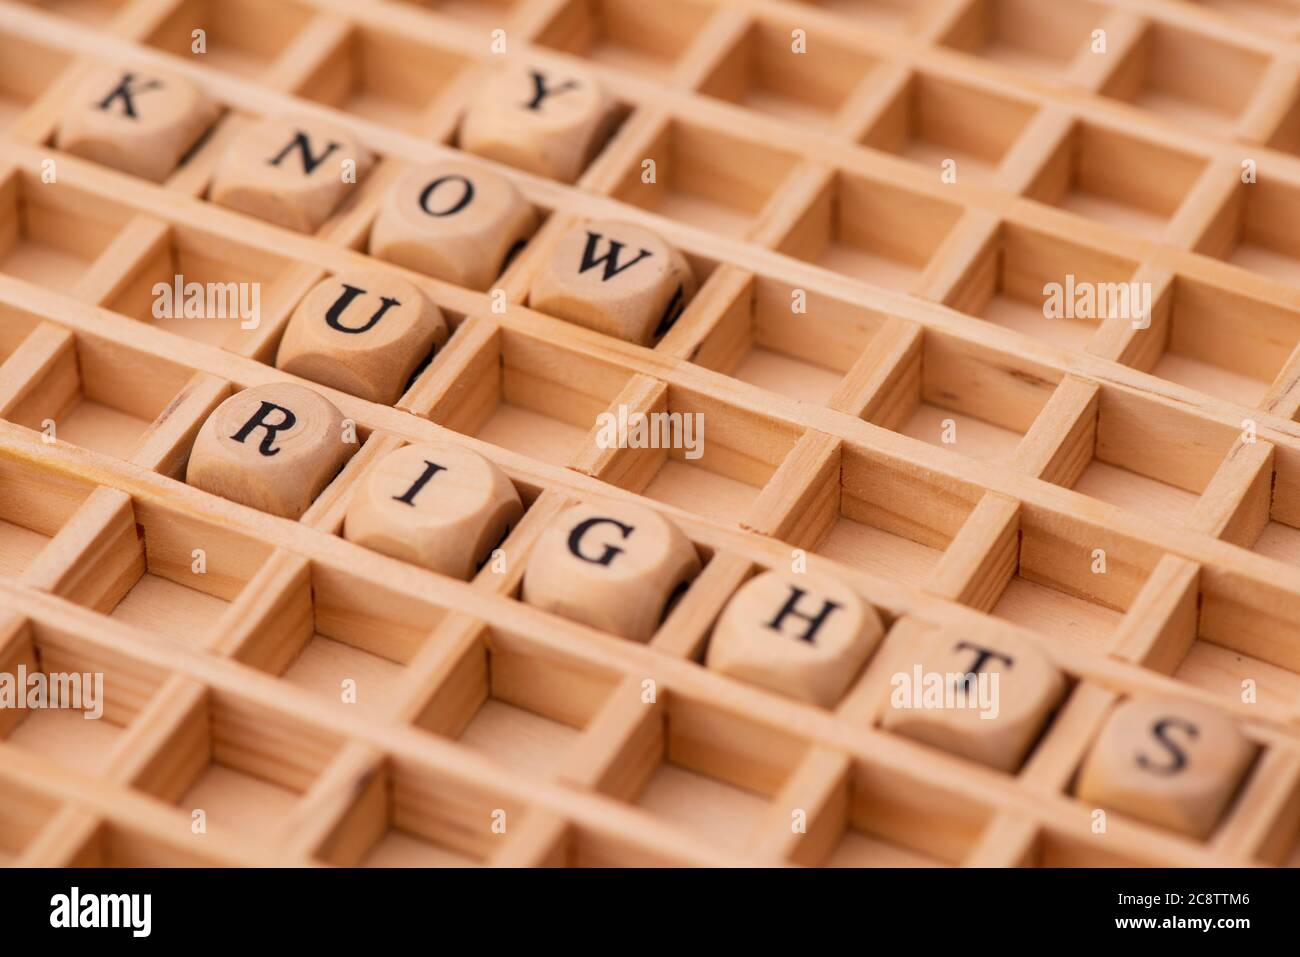 word cloud for know your rights Stock Photo